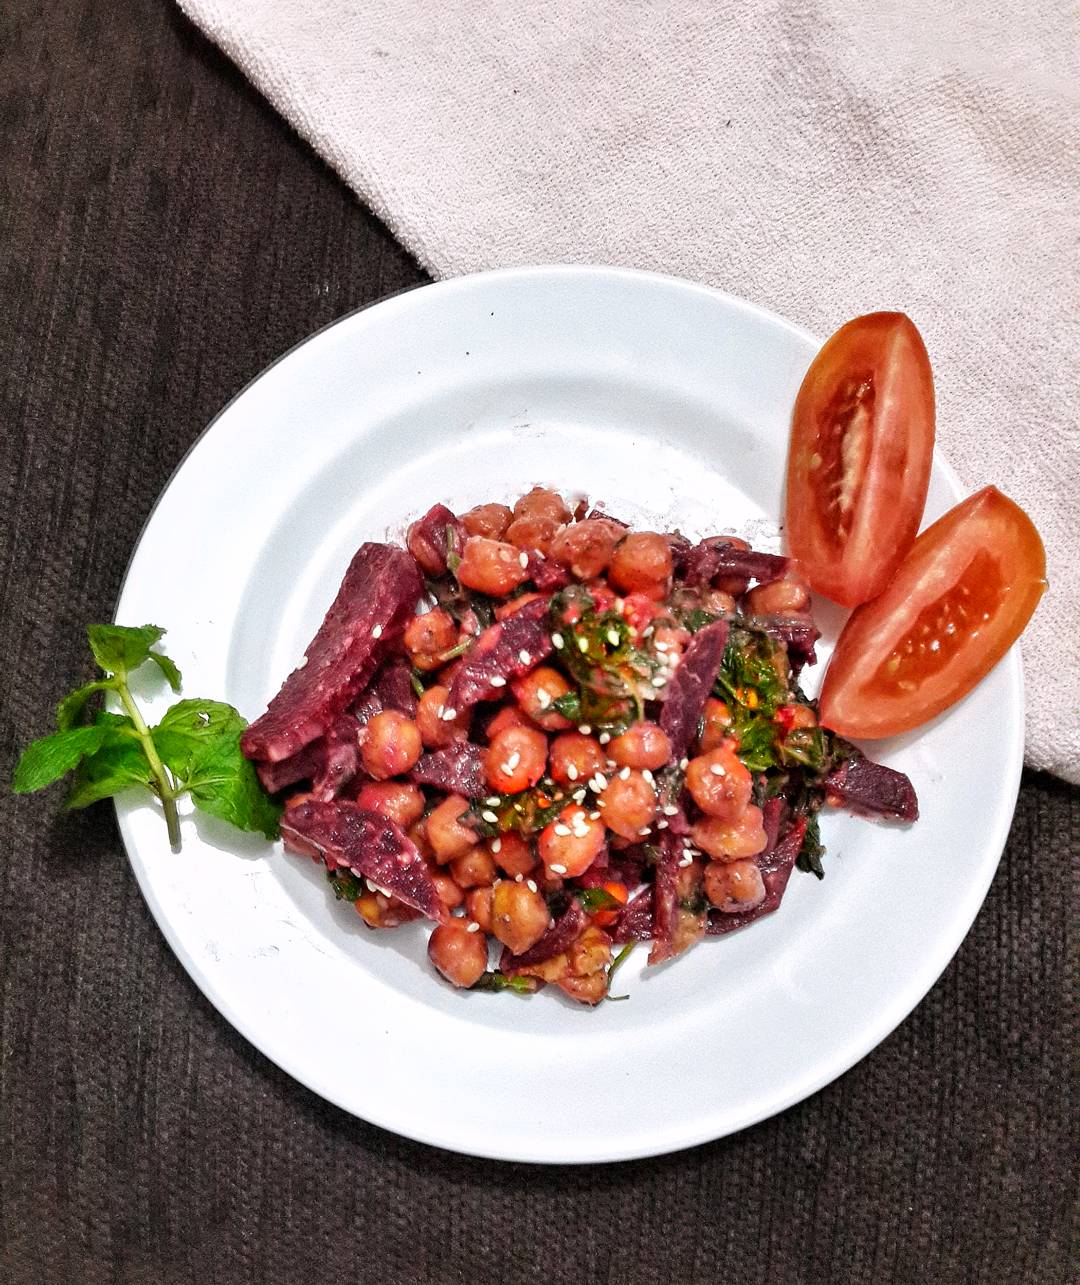 Beets and Chickpea Salad with Peanut-Sesame Dressing